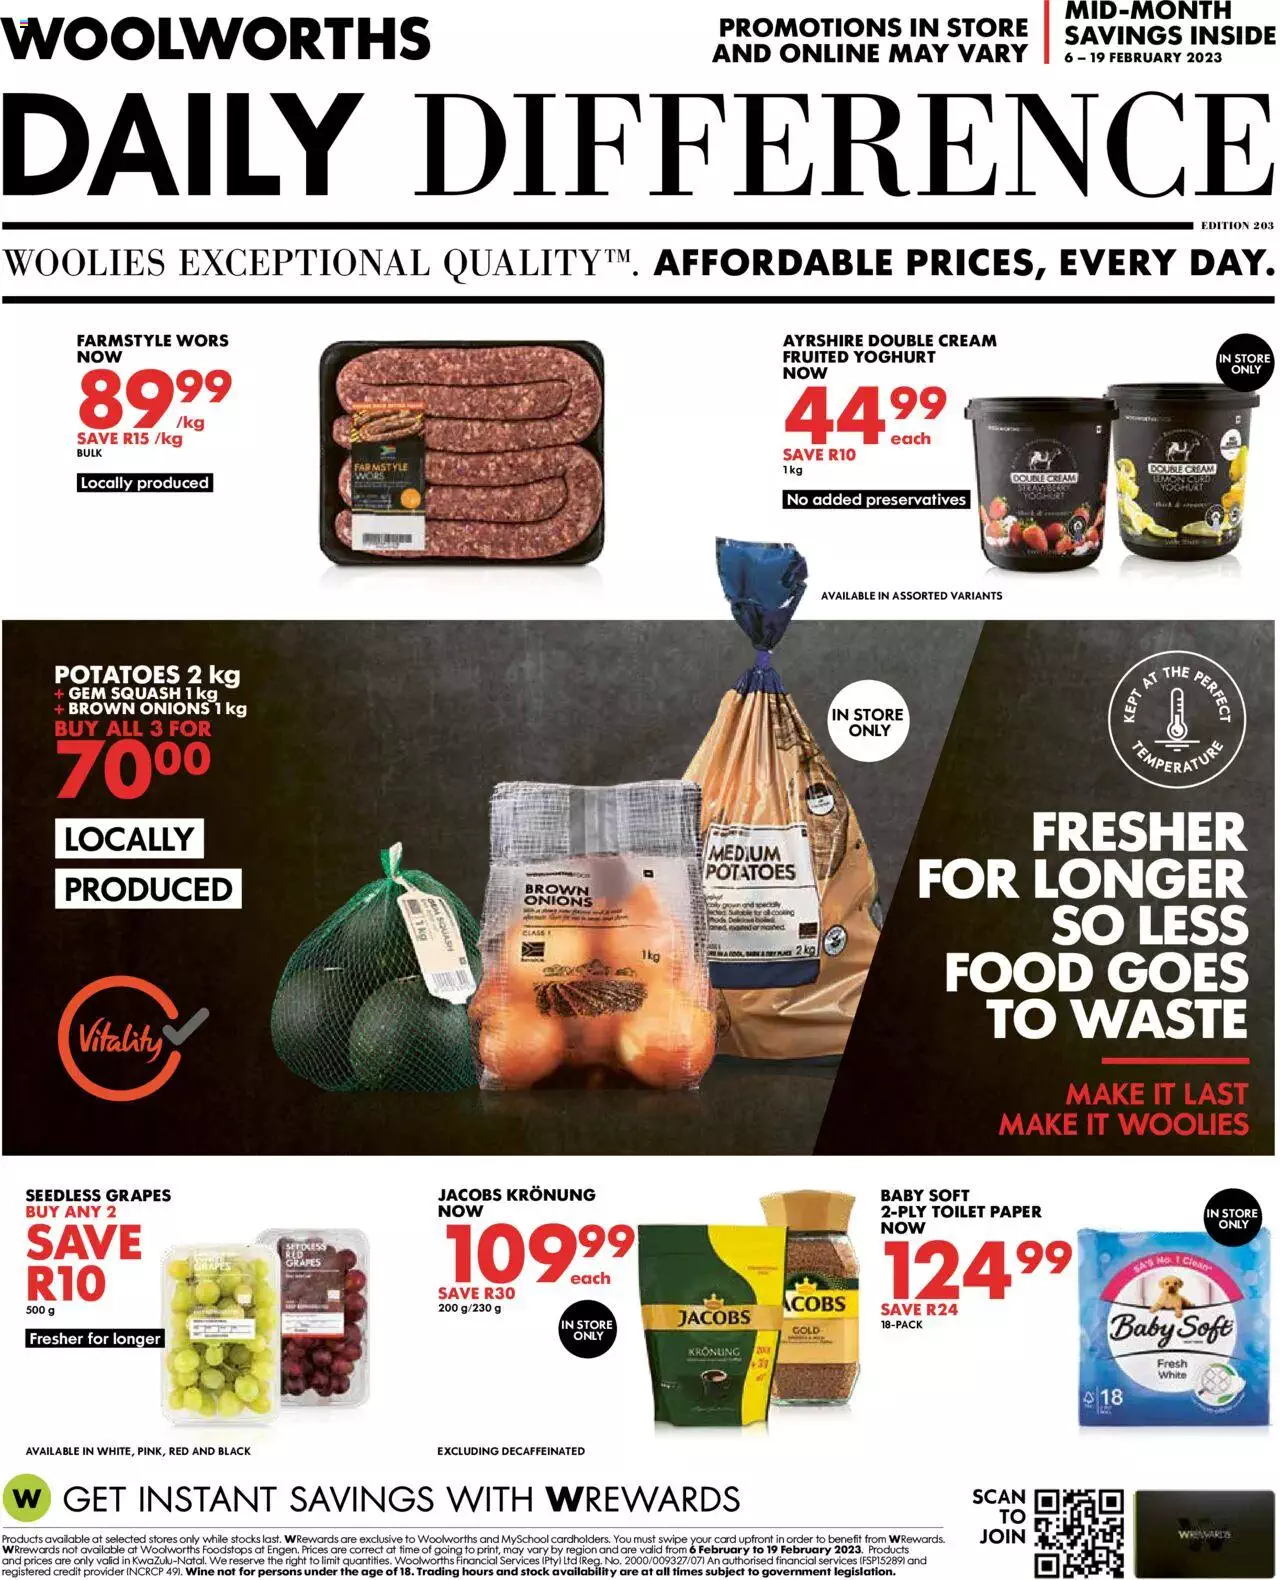 Woolworths Specials 6 – 19 Feb 2023